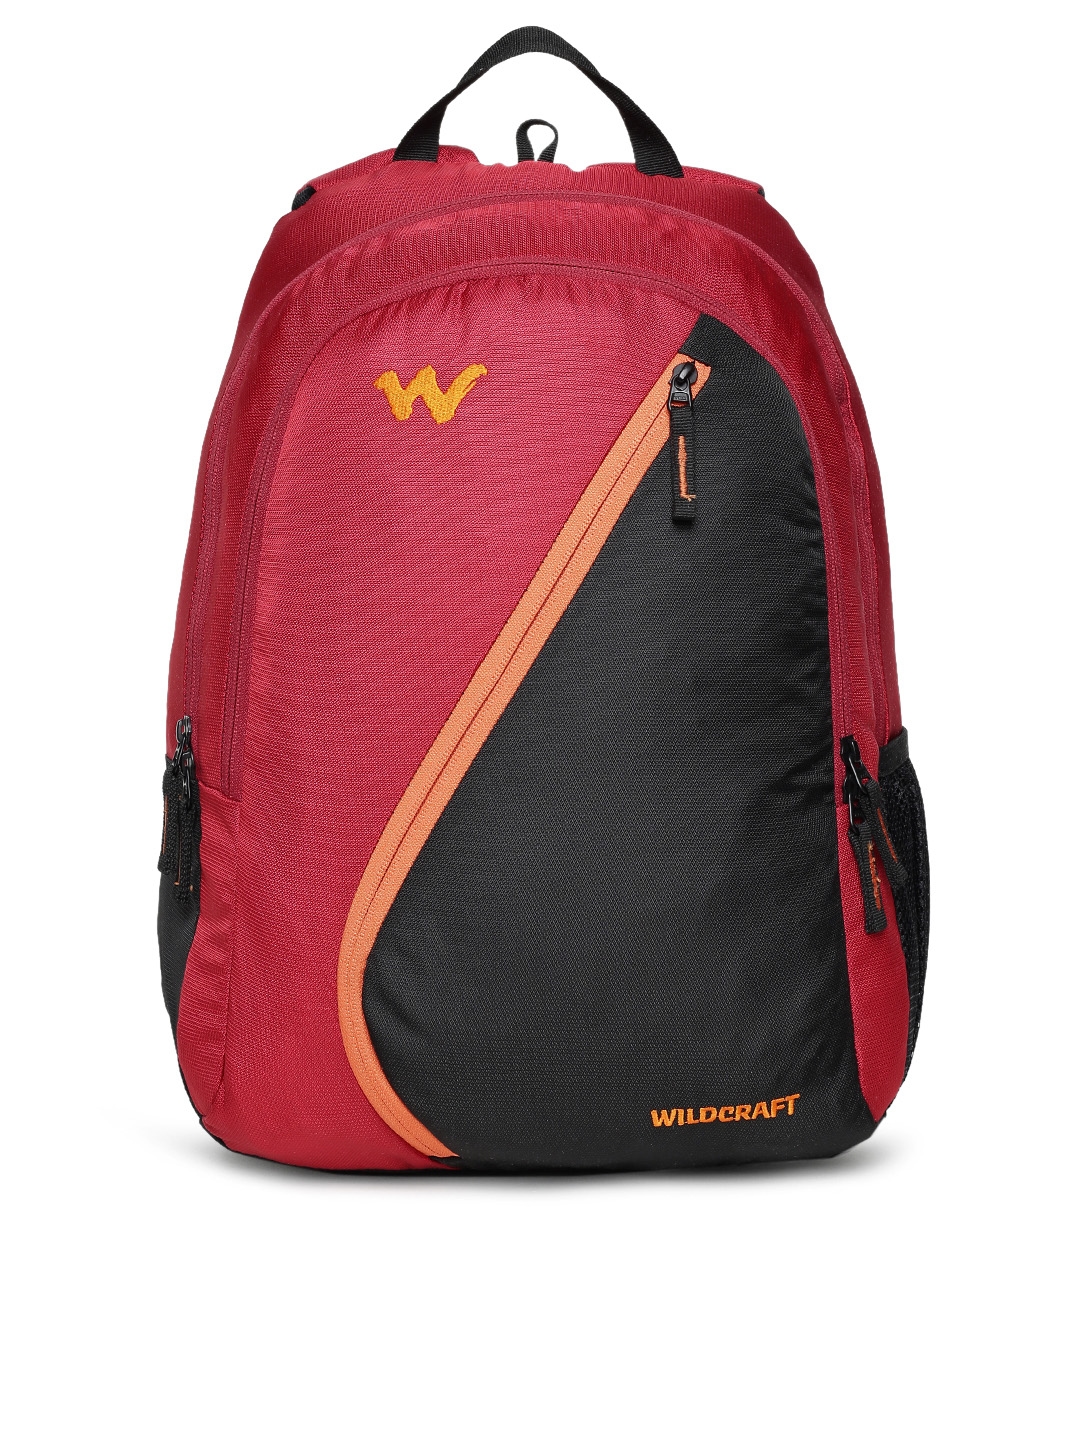 Buy Wildcraft 38 Ltrs Storm Black Casual Backpack 12265BlackHxWxD   18x13x10inches at Amazonin